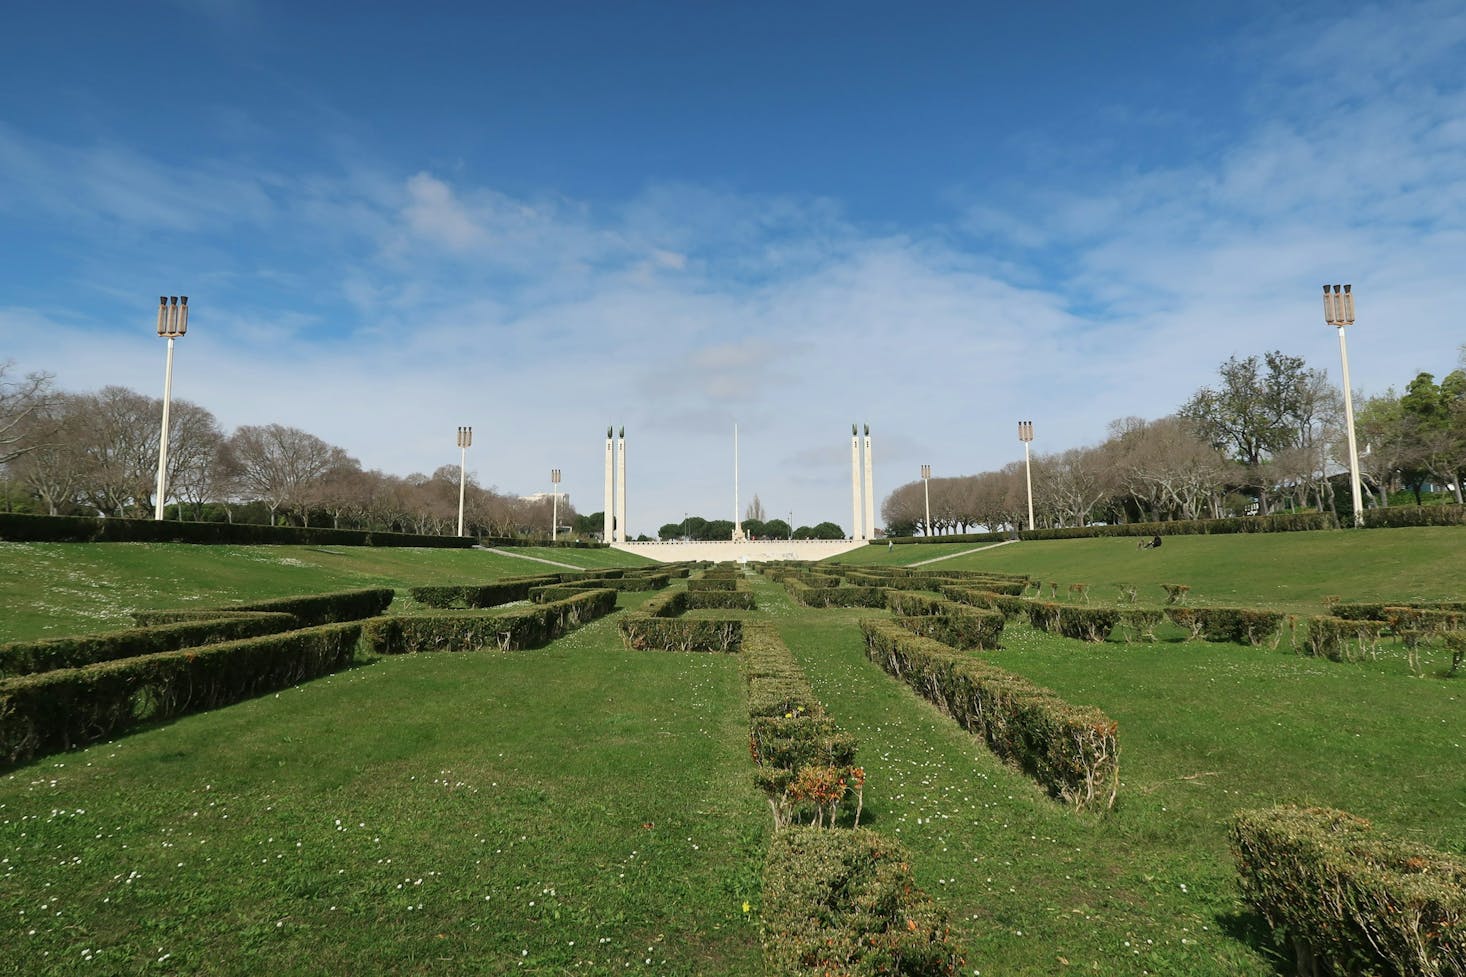 Large park with hedges and a monument at the end